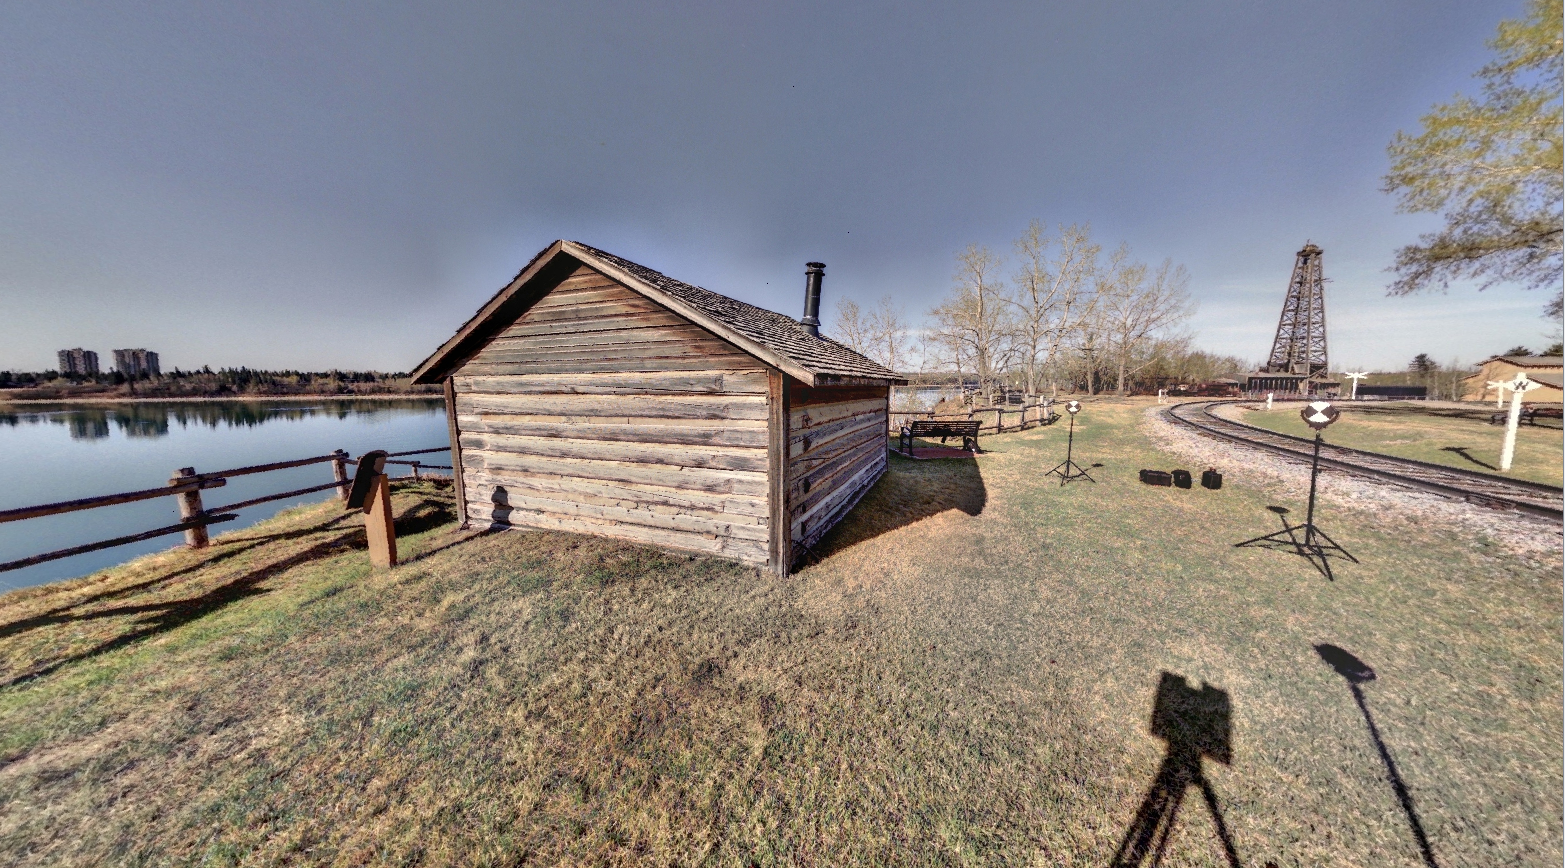 Panoramic view of the Miner's Cabin from Z+F 5010X laser scanner, scanning location 2